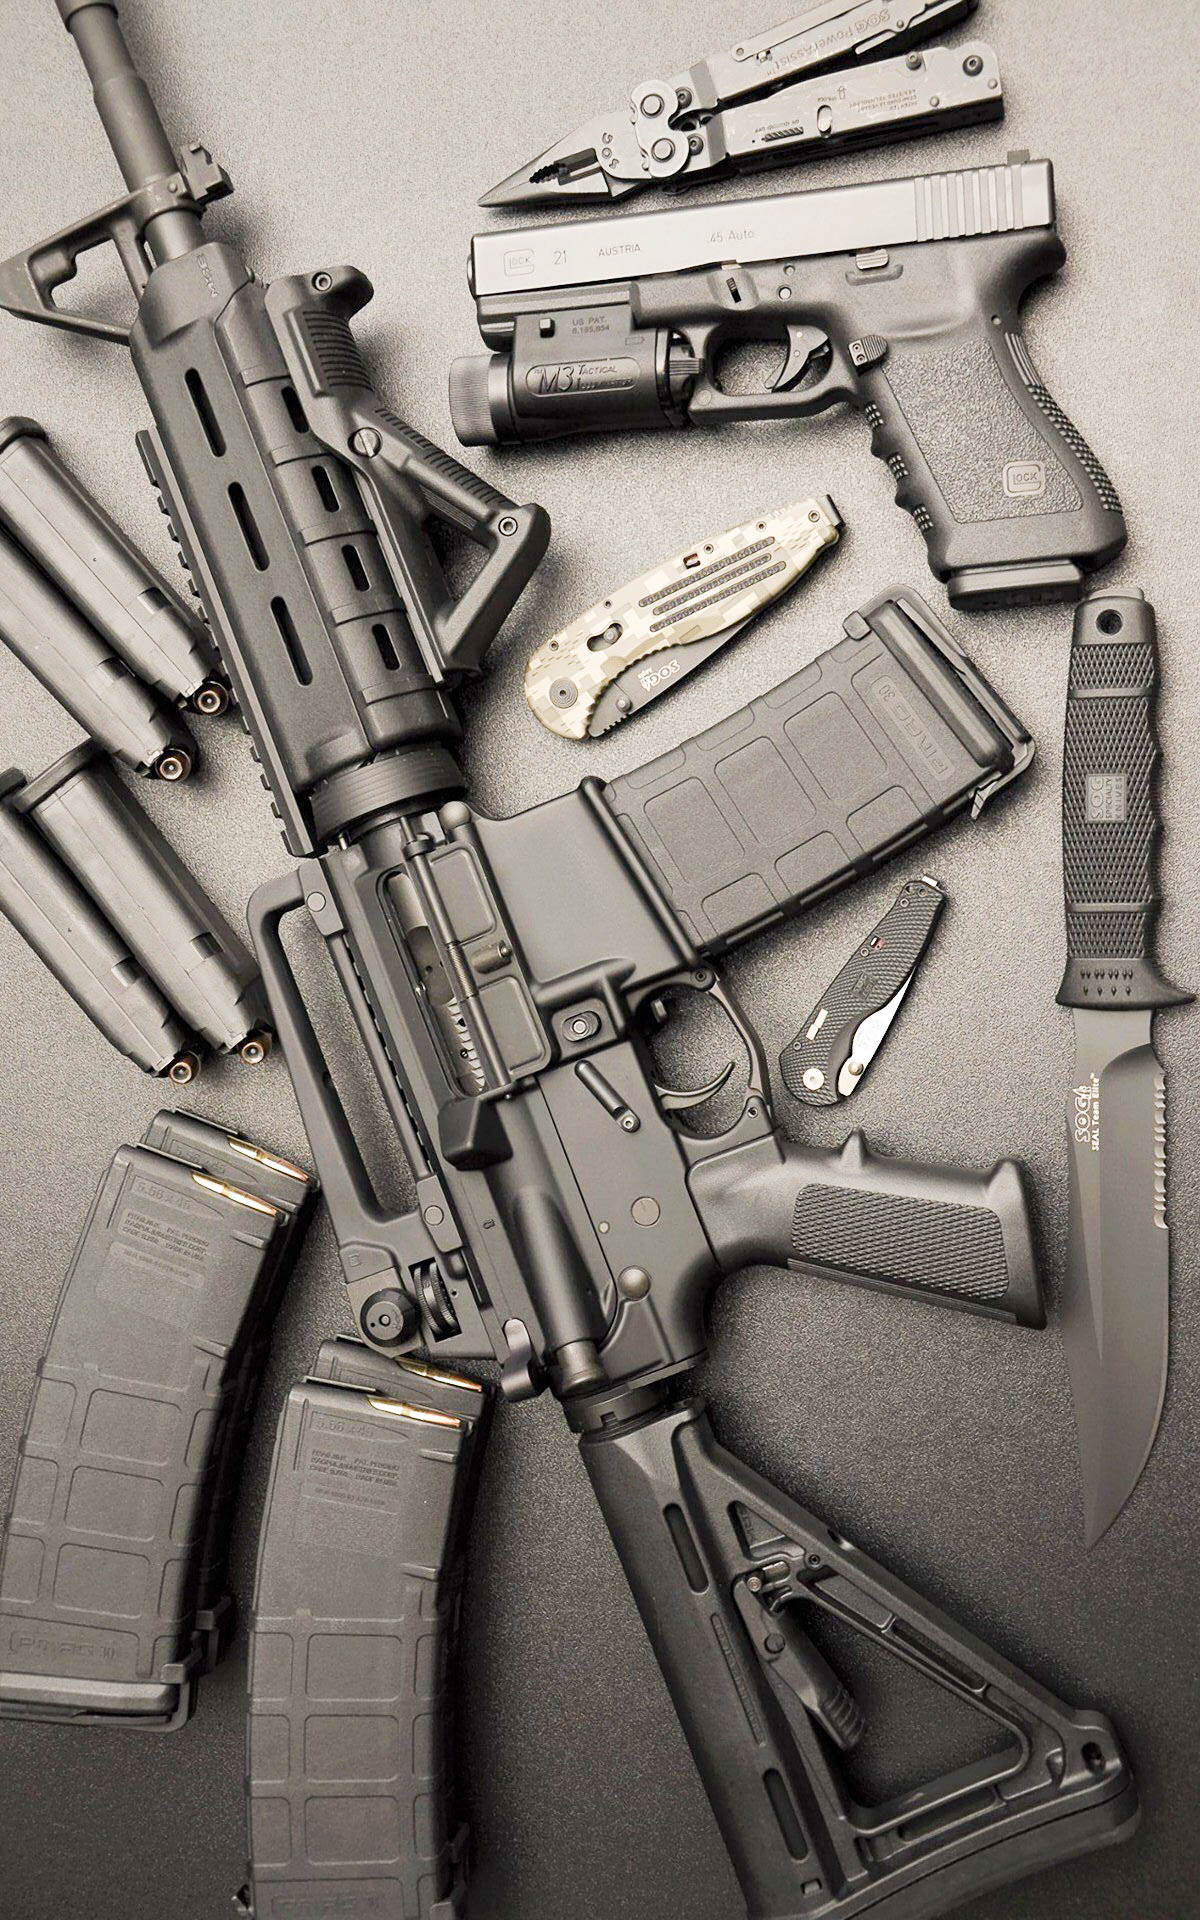 Ar-15 Weapon Some Amazing Hd Wallpapers, Backgrounds - Ar 15 Wallpaper Iphone , HD Wallpaper & Backgrounds